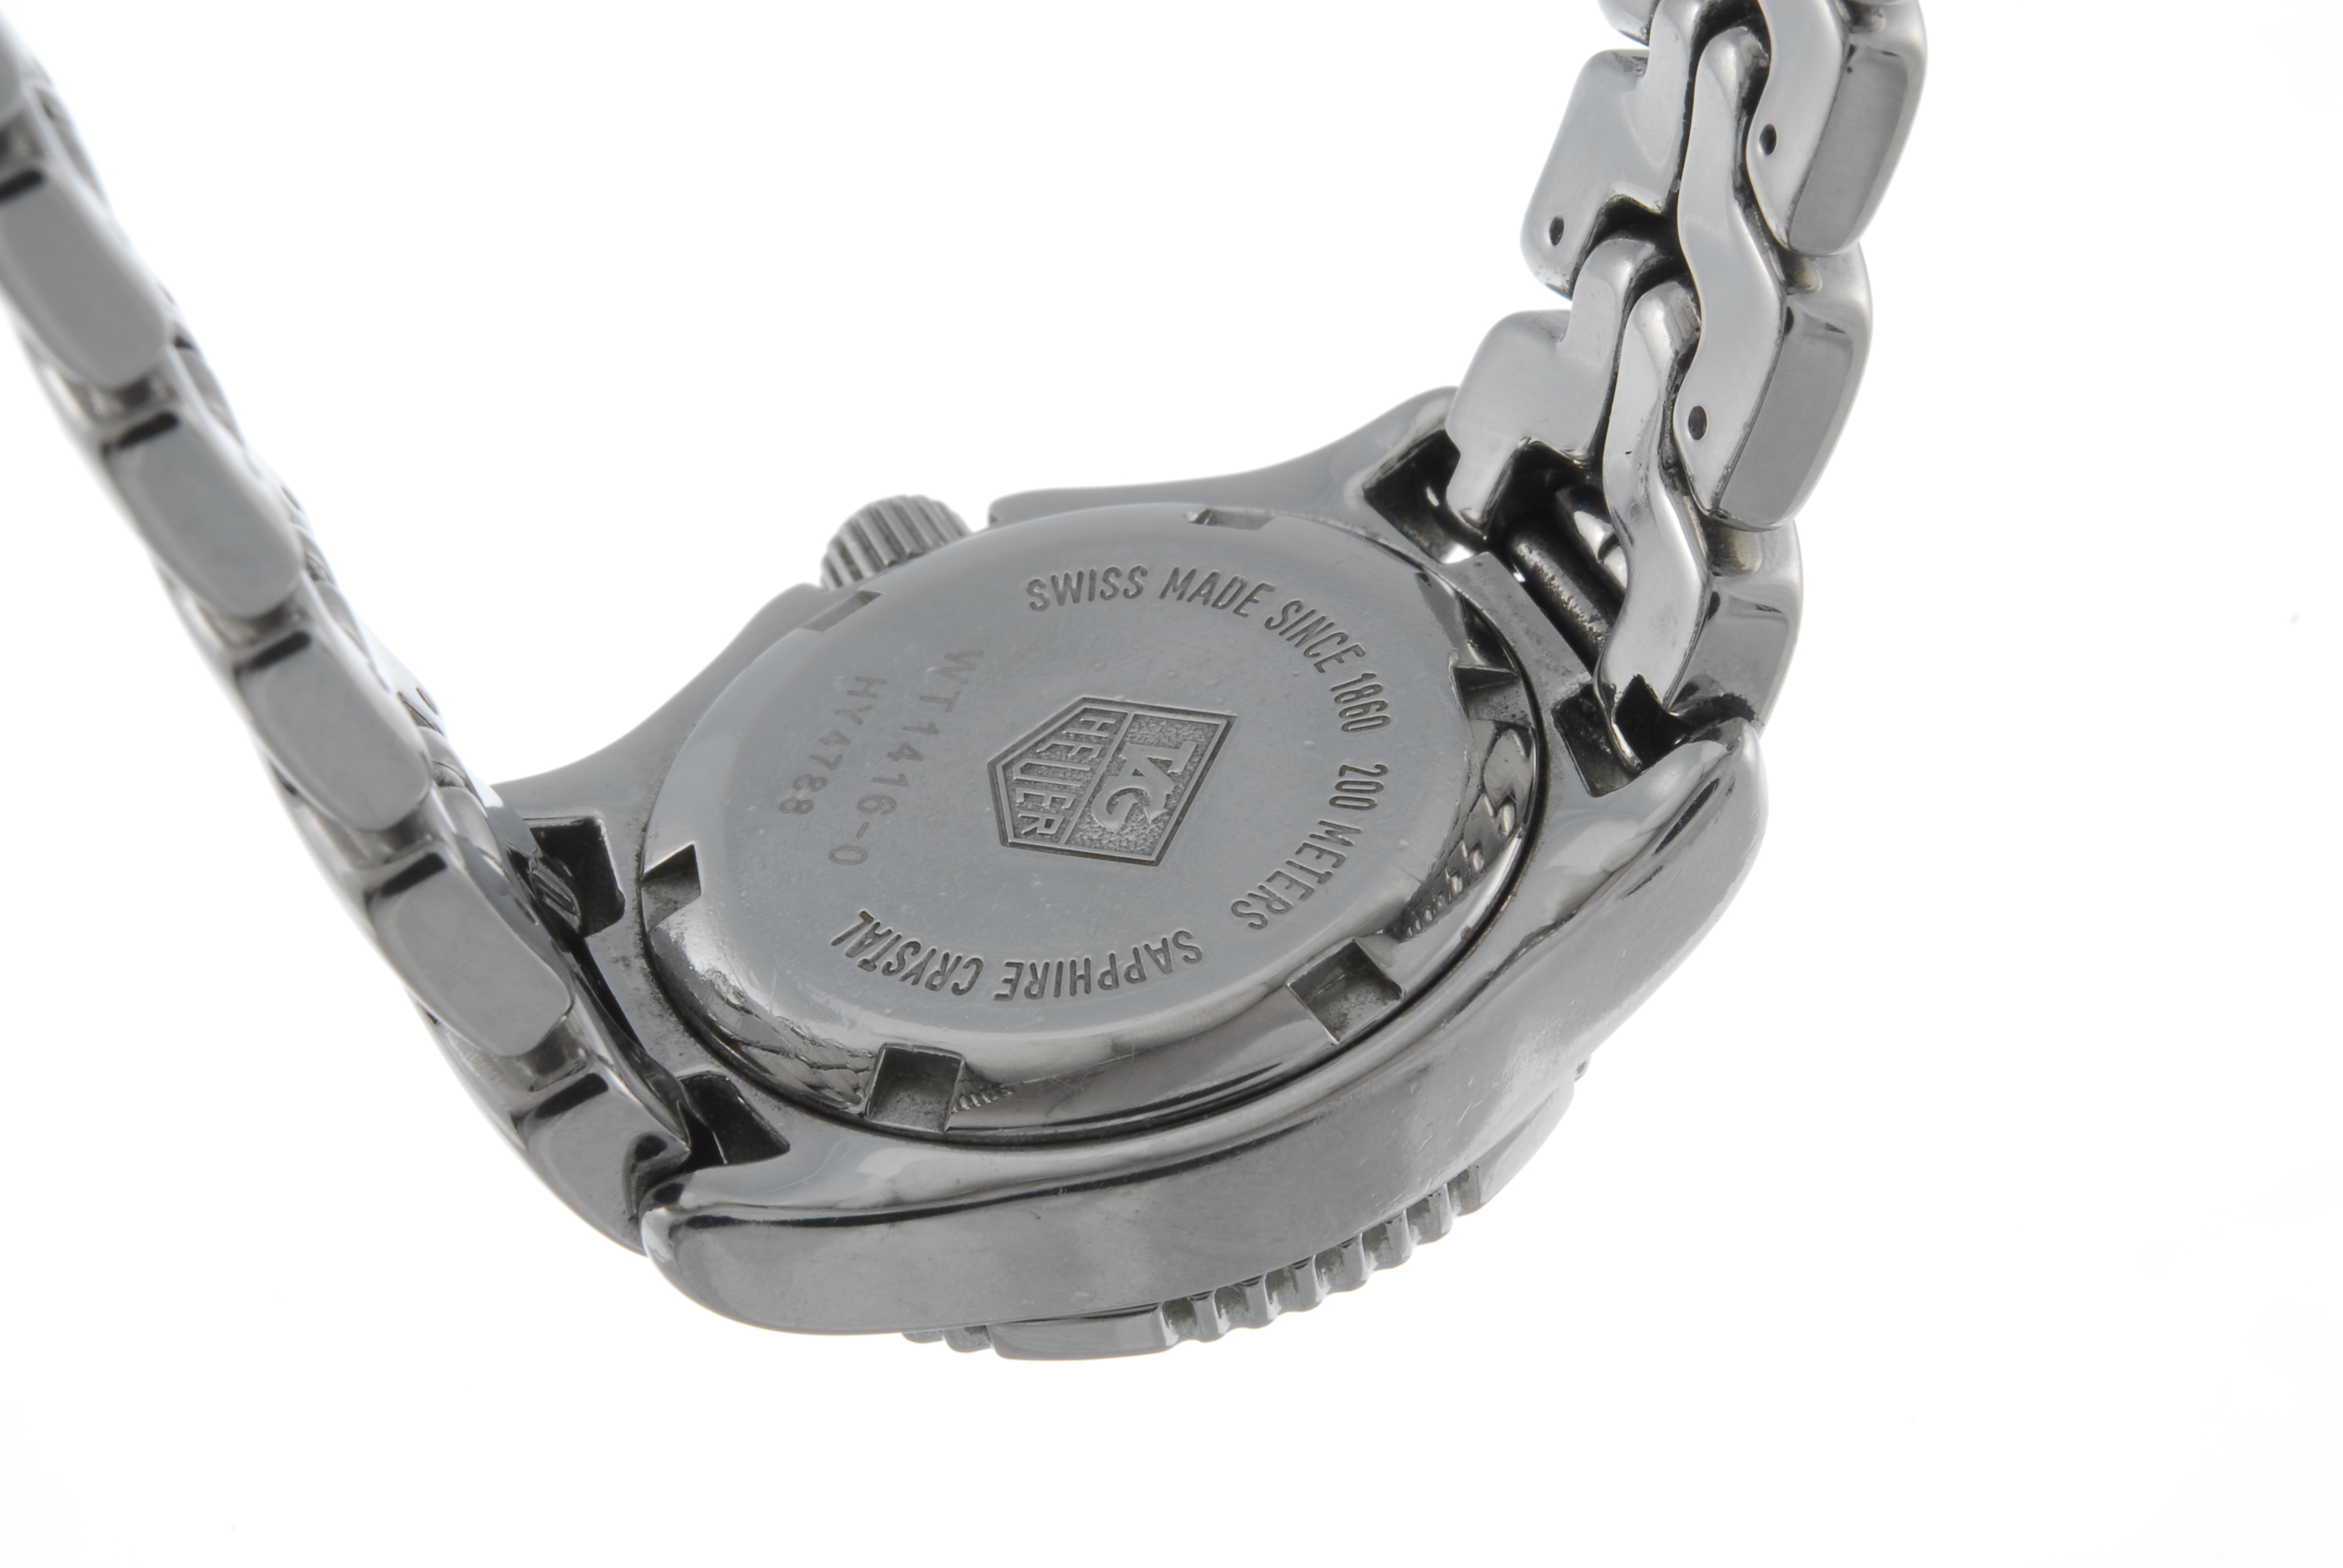 TAG HEUER - a lady's Link bracelet watch. Stainless steel case with calibrated bezel. Reference - Image 2 of 4